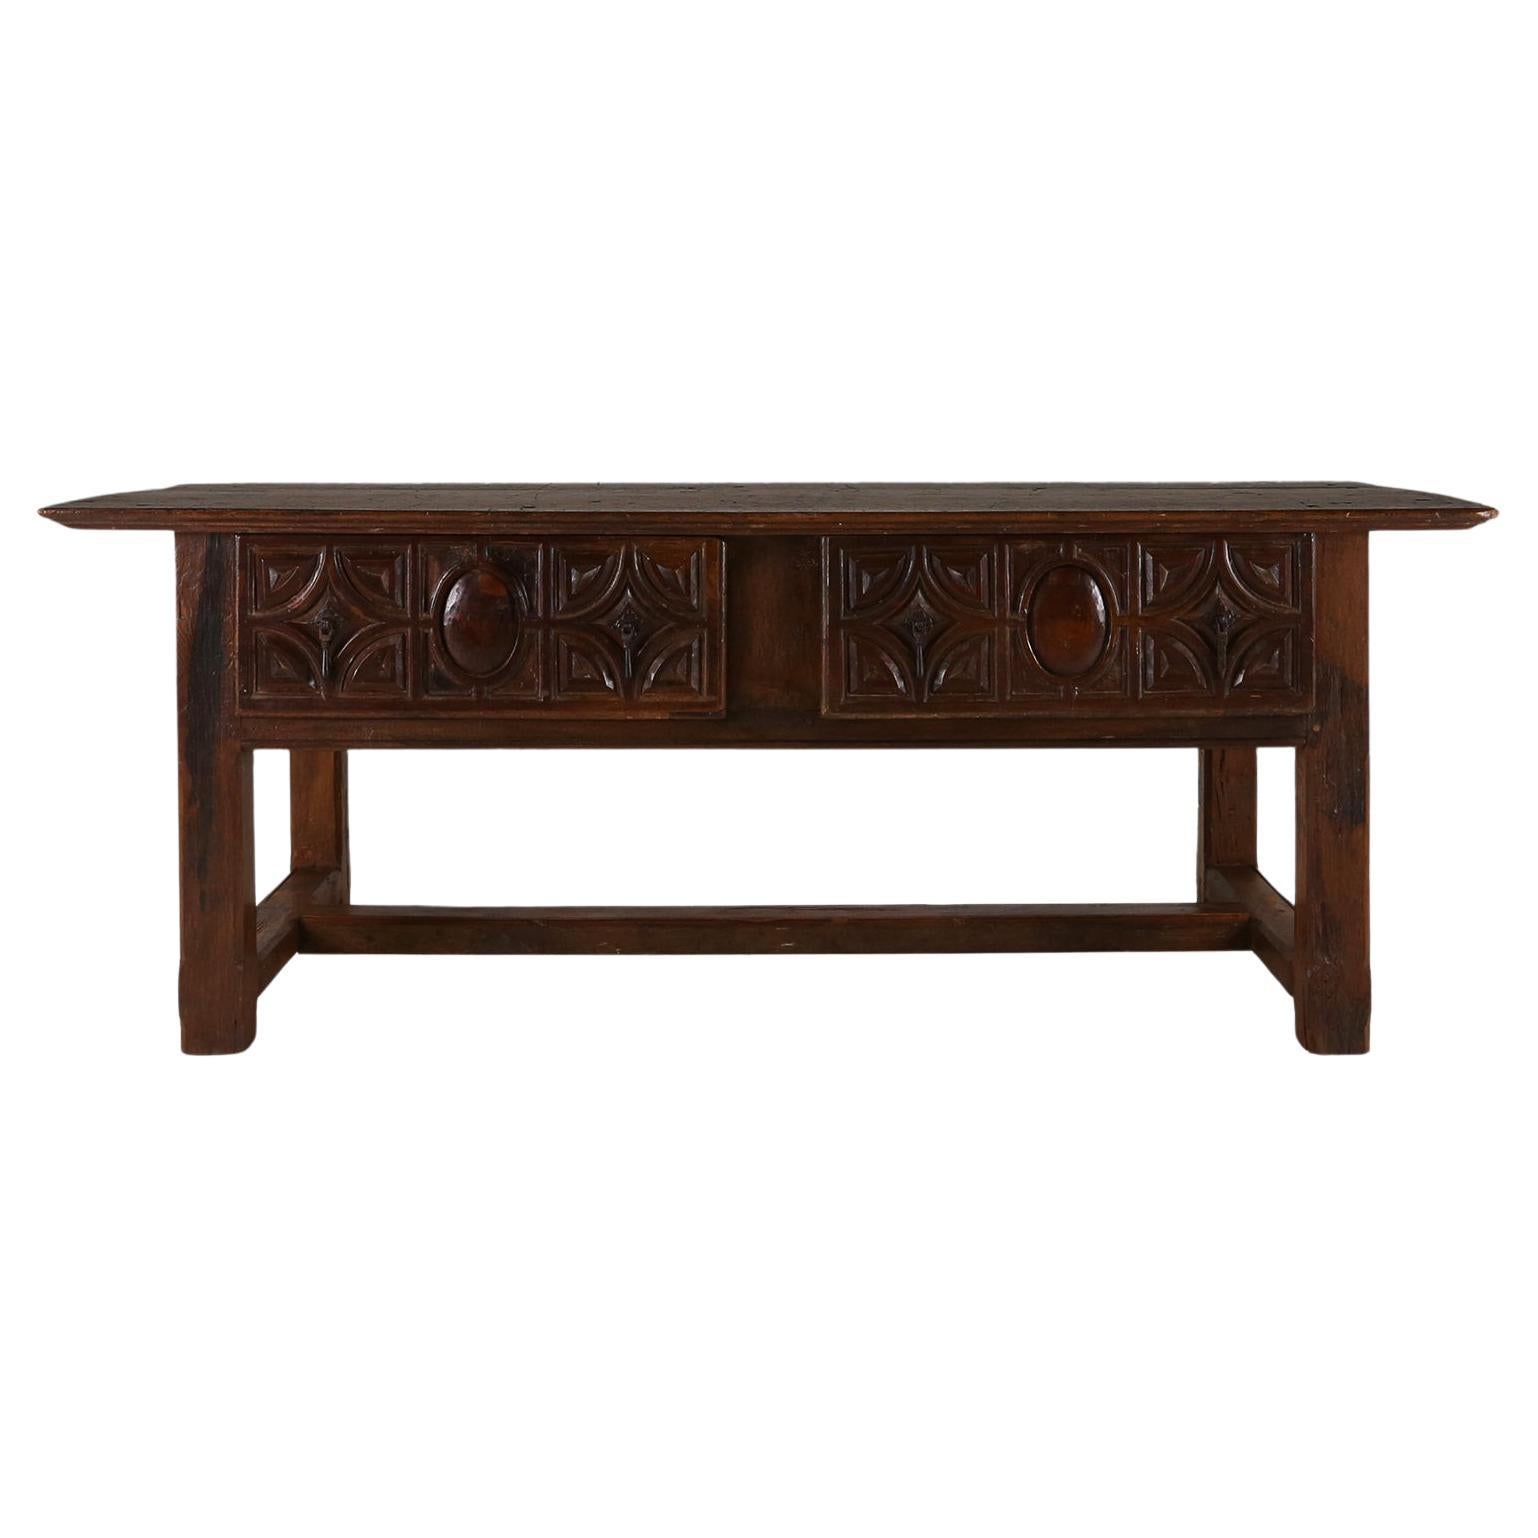 Antique Spanish console table in oak wood, with 2 large drawers from the 18th ce